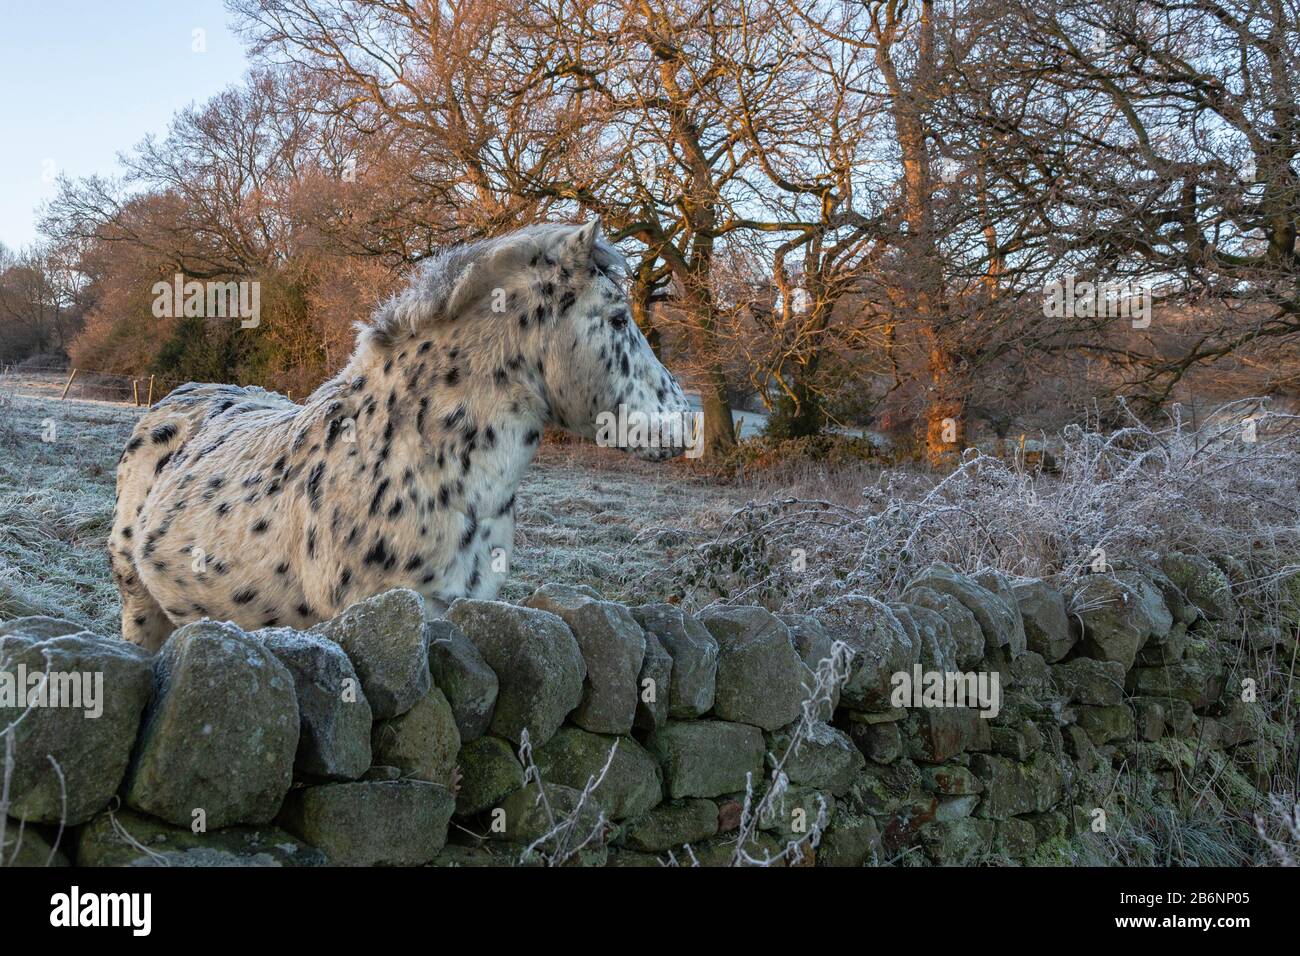 Appaloosa Pony leaning over a dry stone wall in winter. Stock Photo